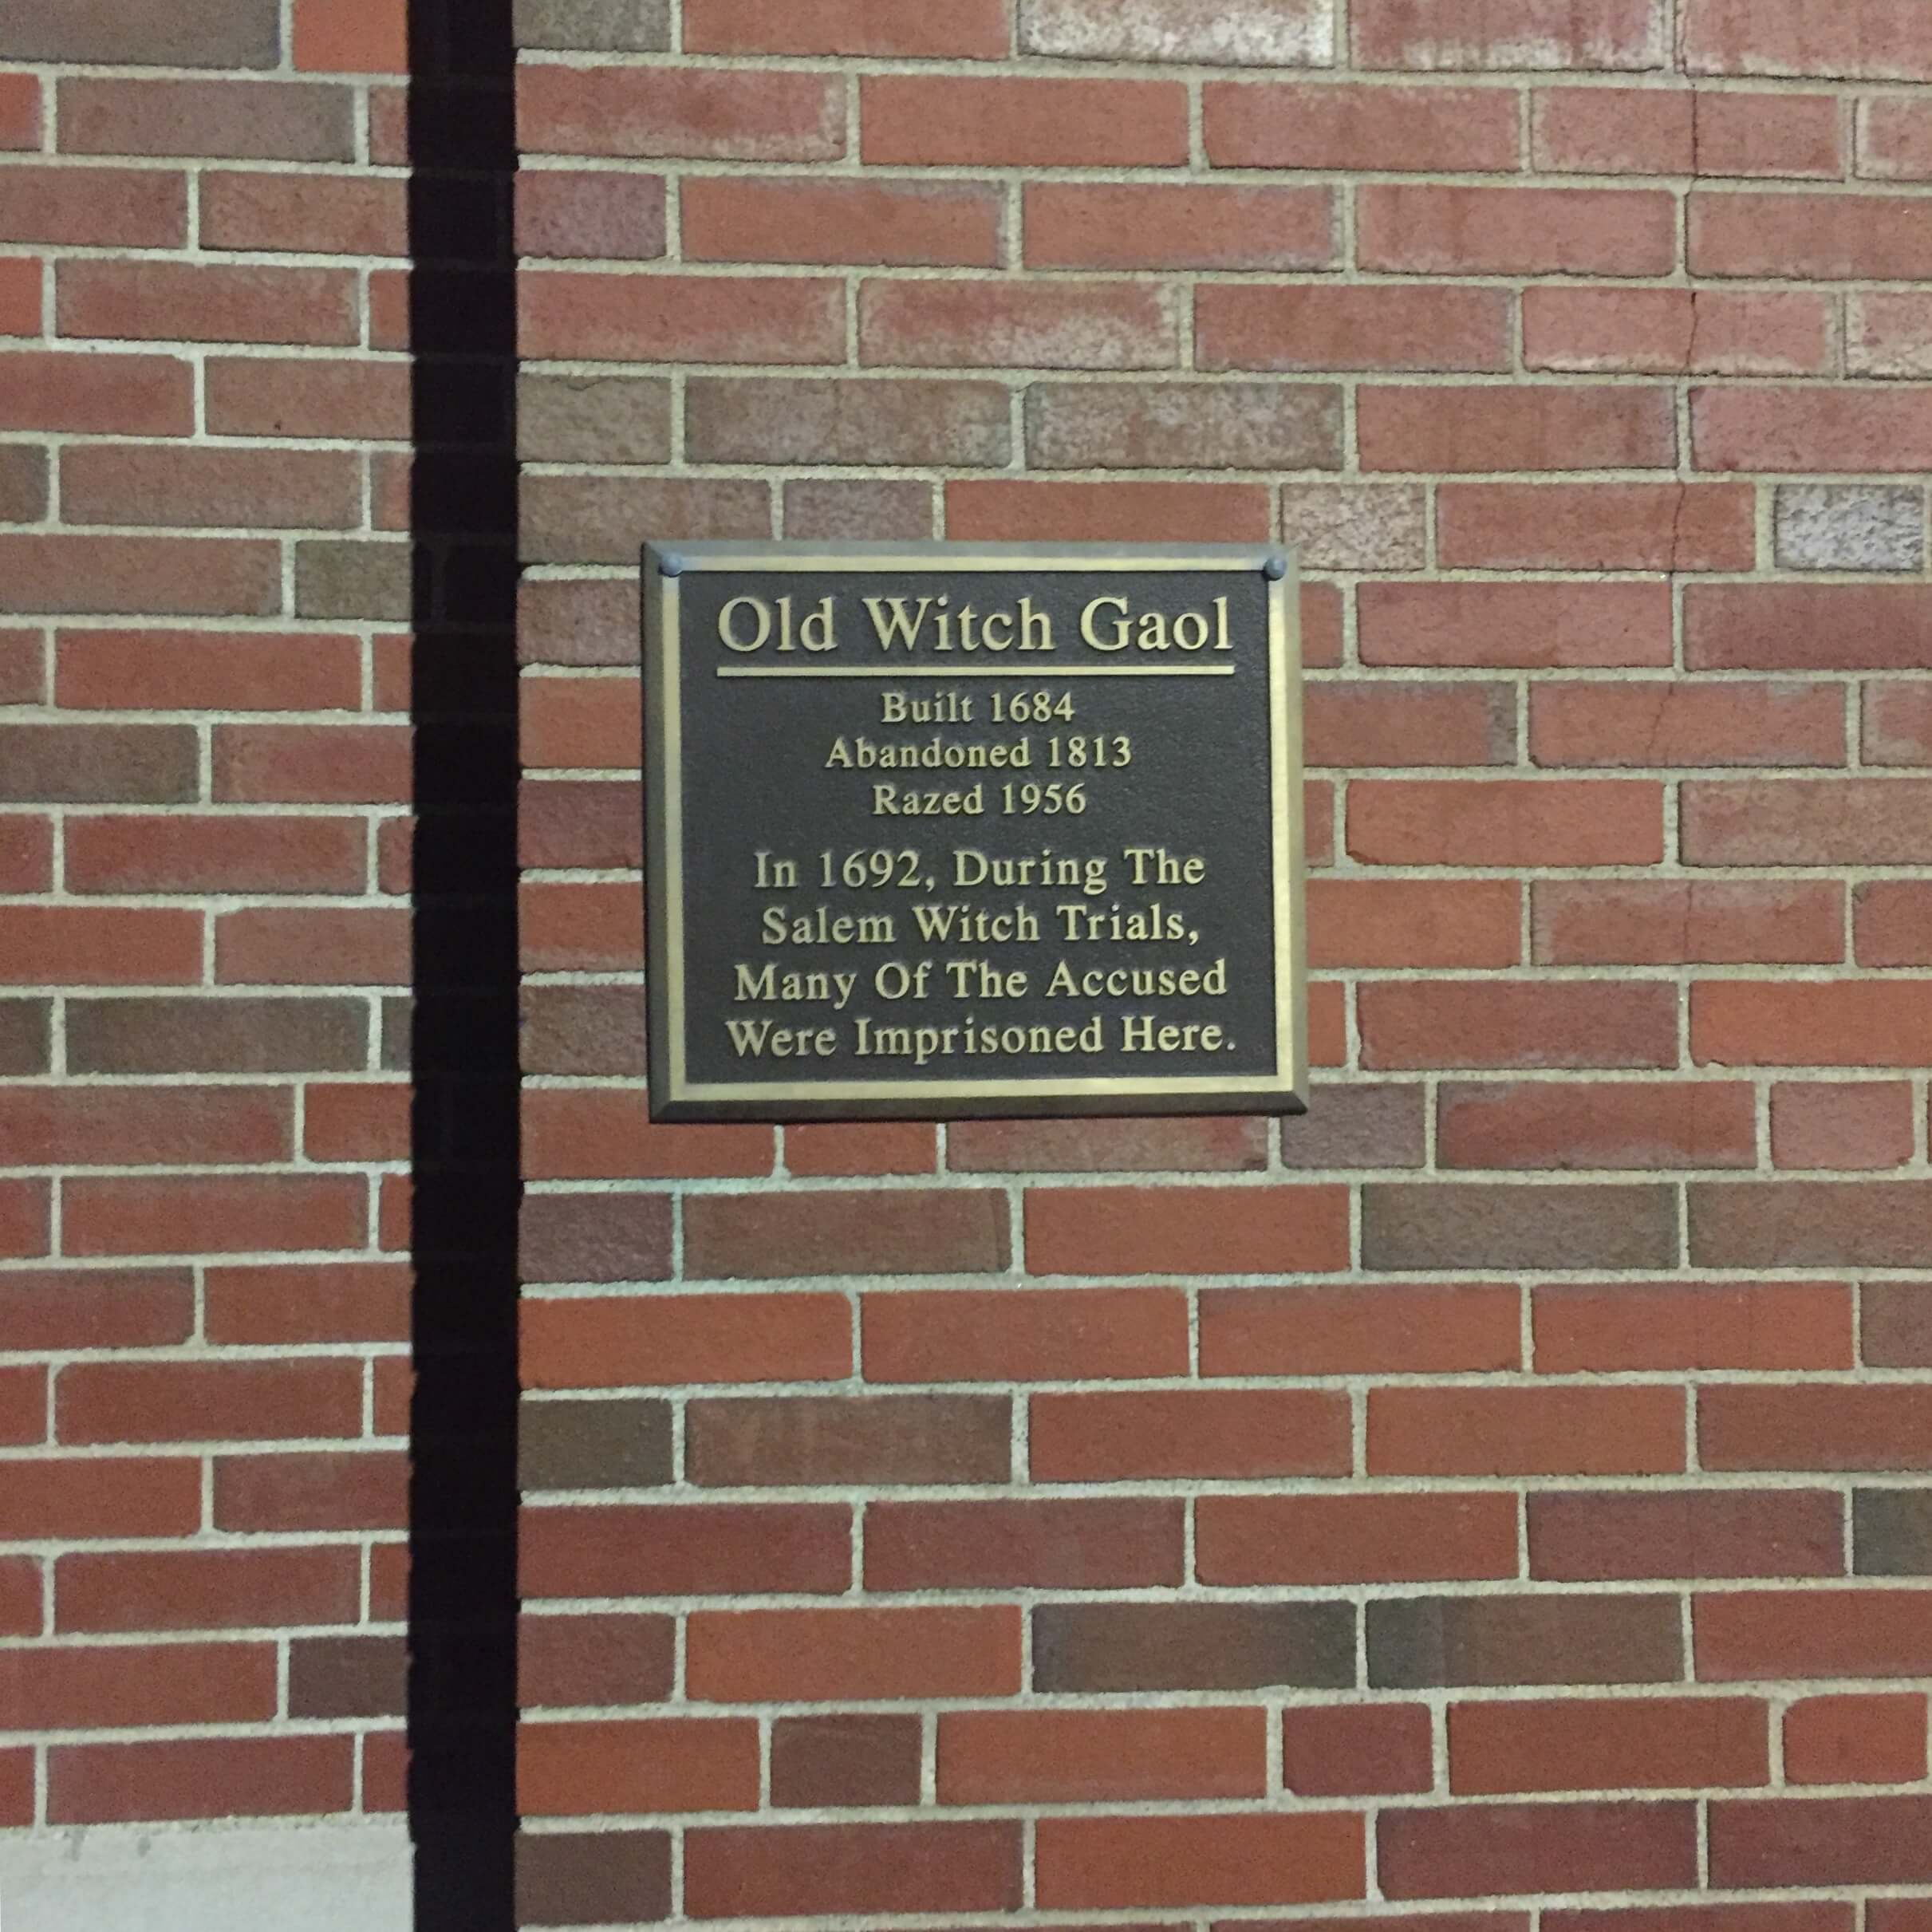 A plaque reading: Old Witch Goal: Built in 1684, Abandoned 1813, Razed 1956. In 1692, during the Salem Witch Trials, Many Of The Accused Were Imprisoned Here